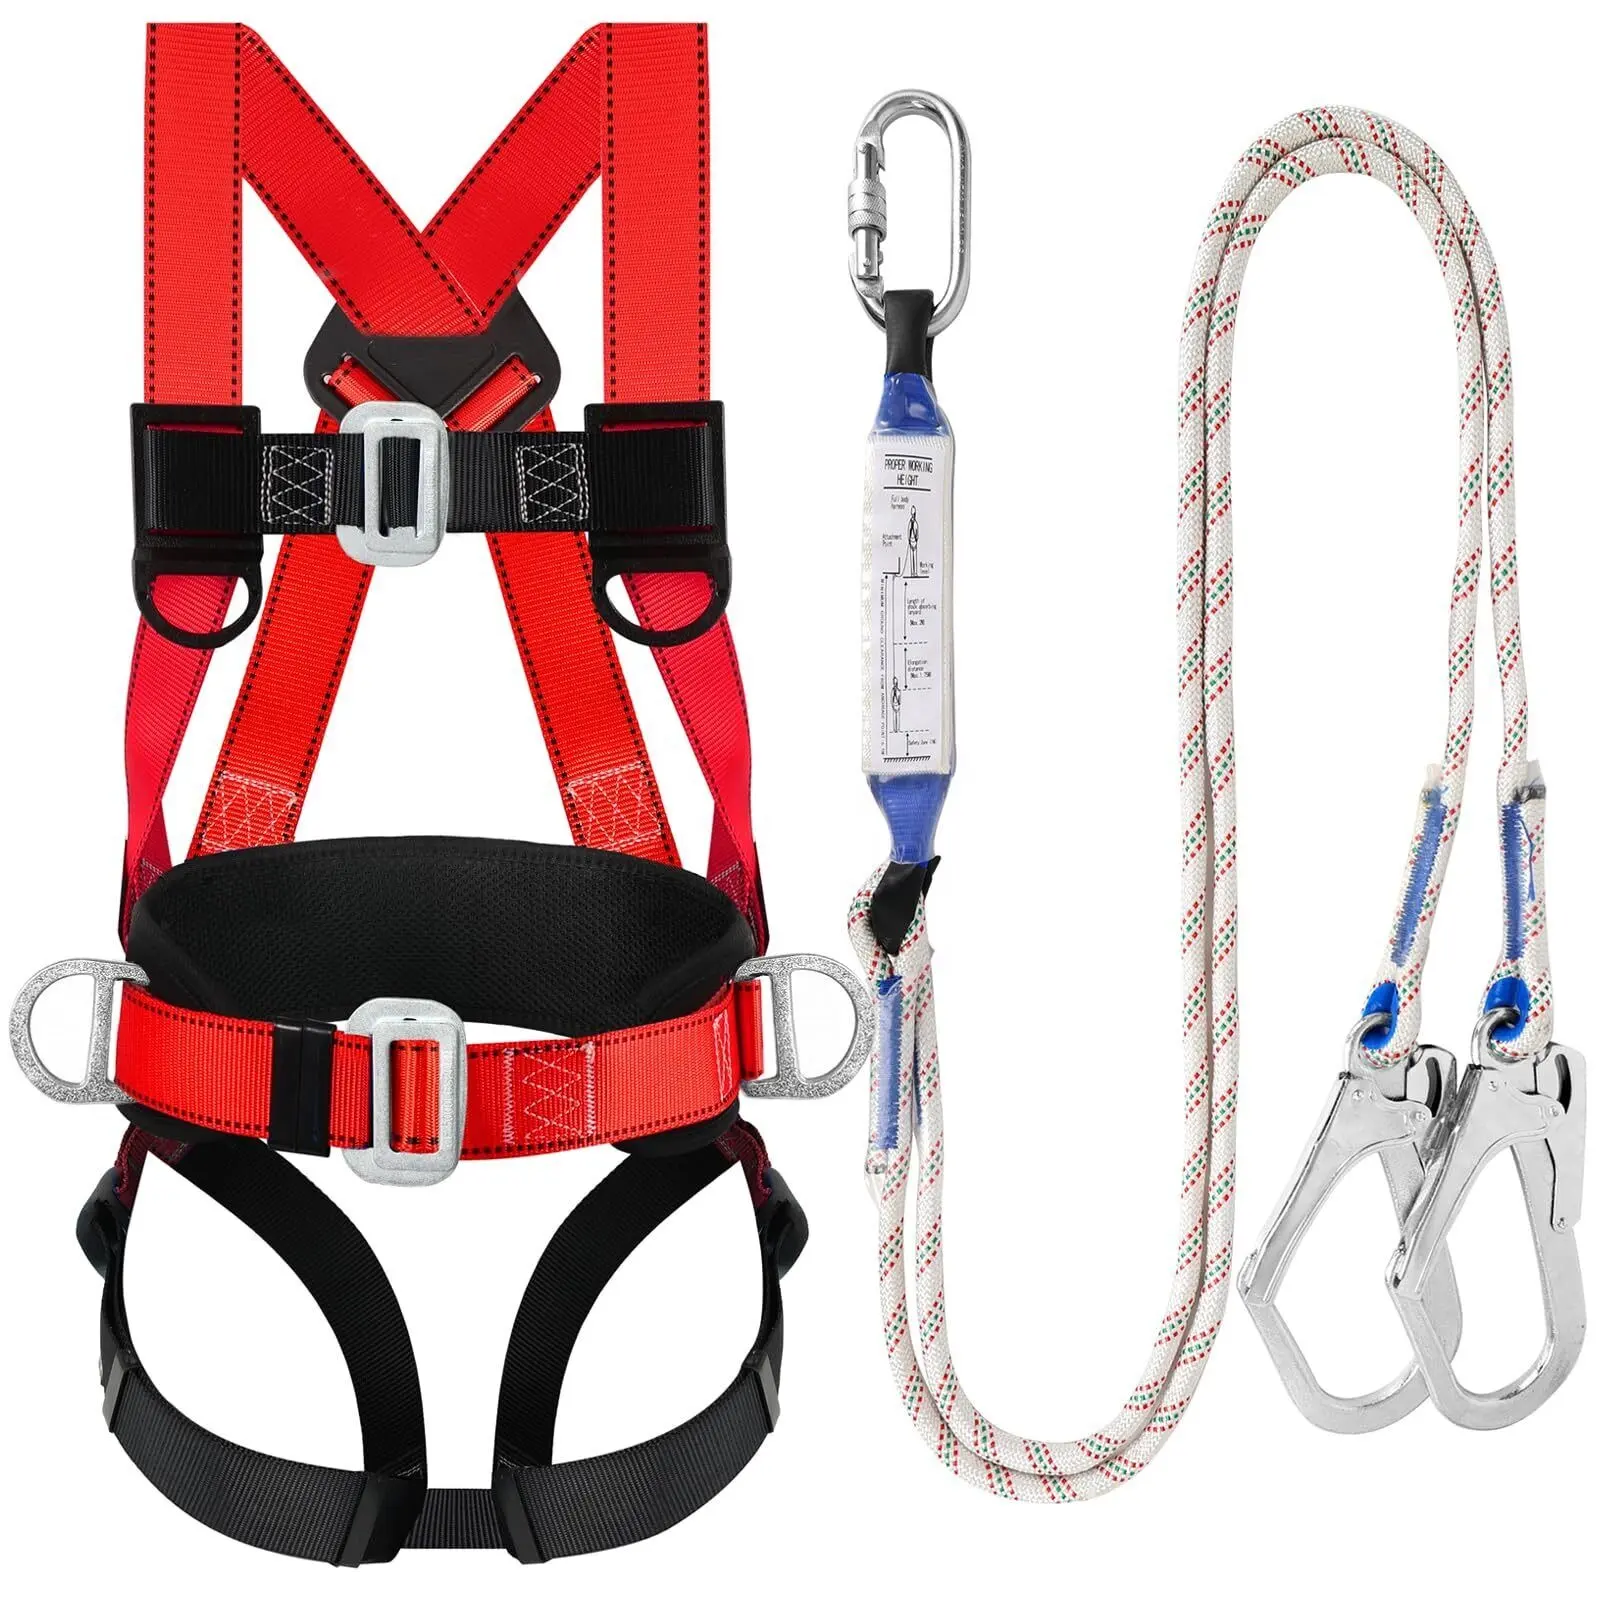 Safety Harness Fall Protection Kit Full Body Roofing harnesses with Shock Absorbing Lanyard